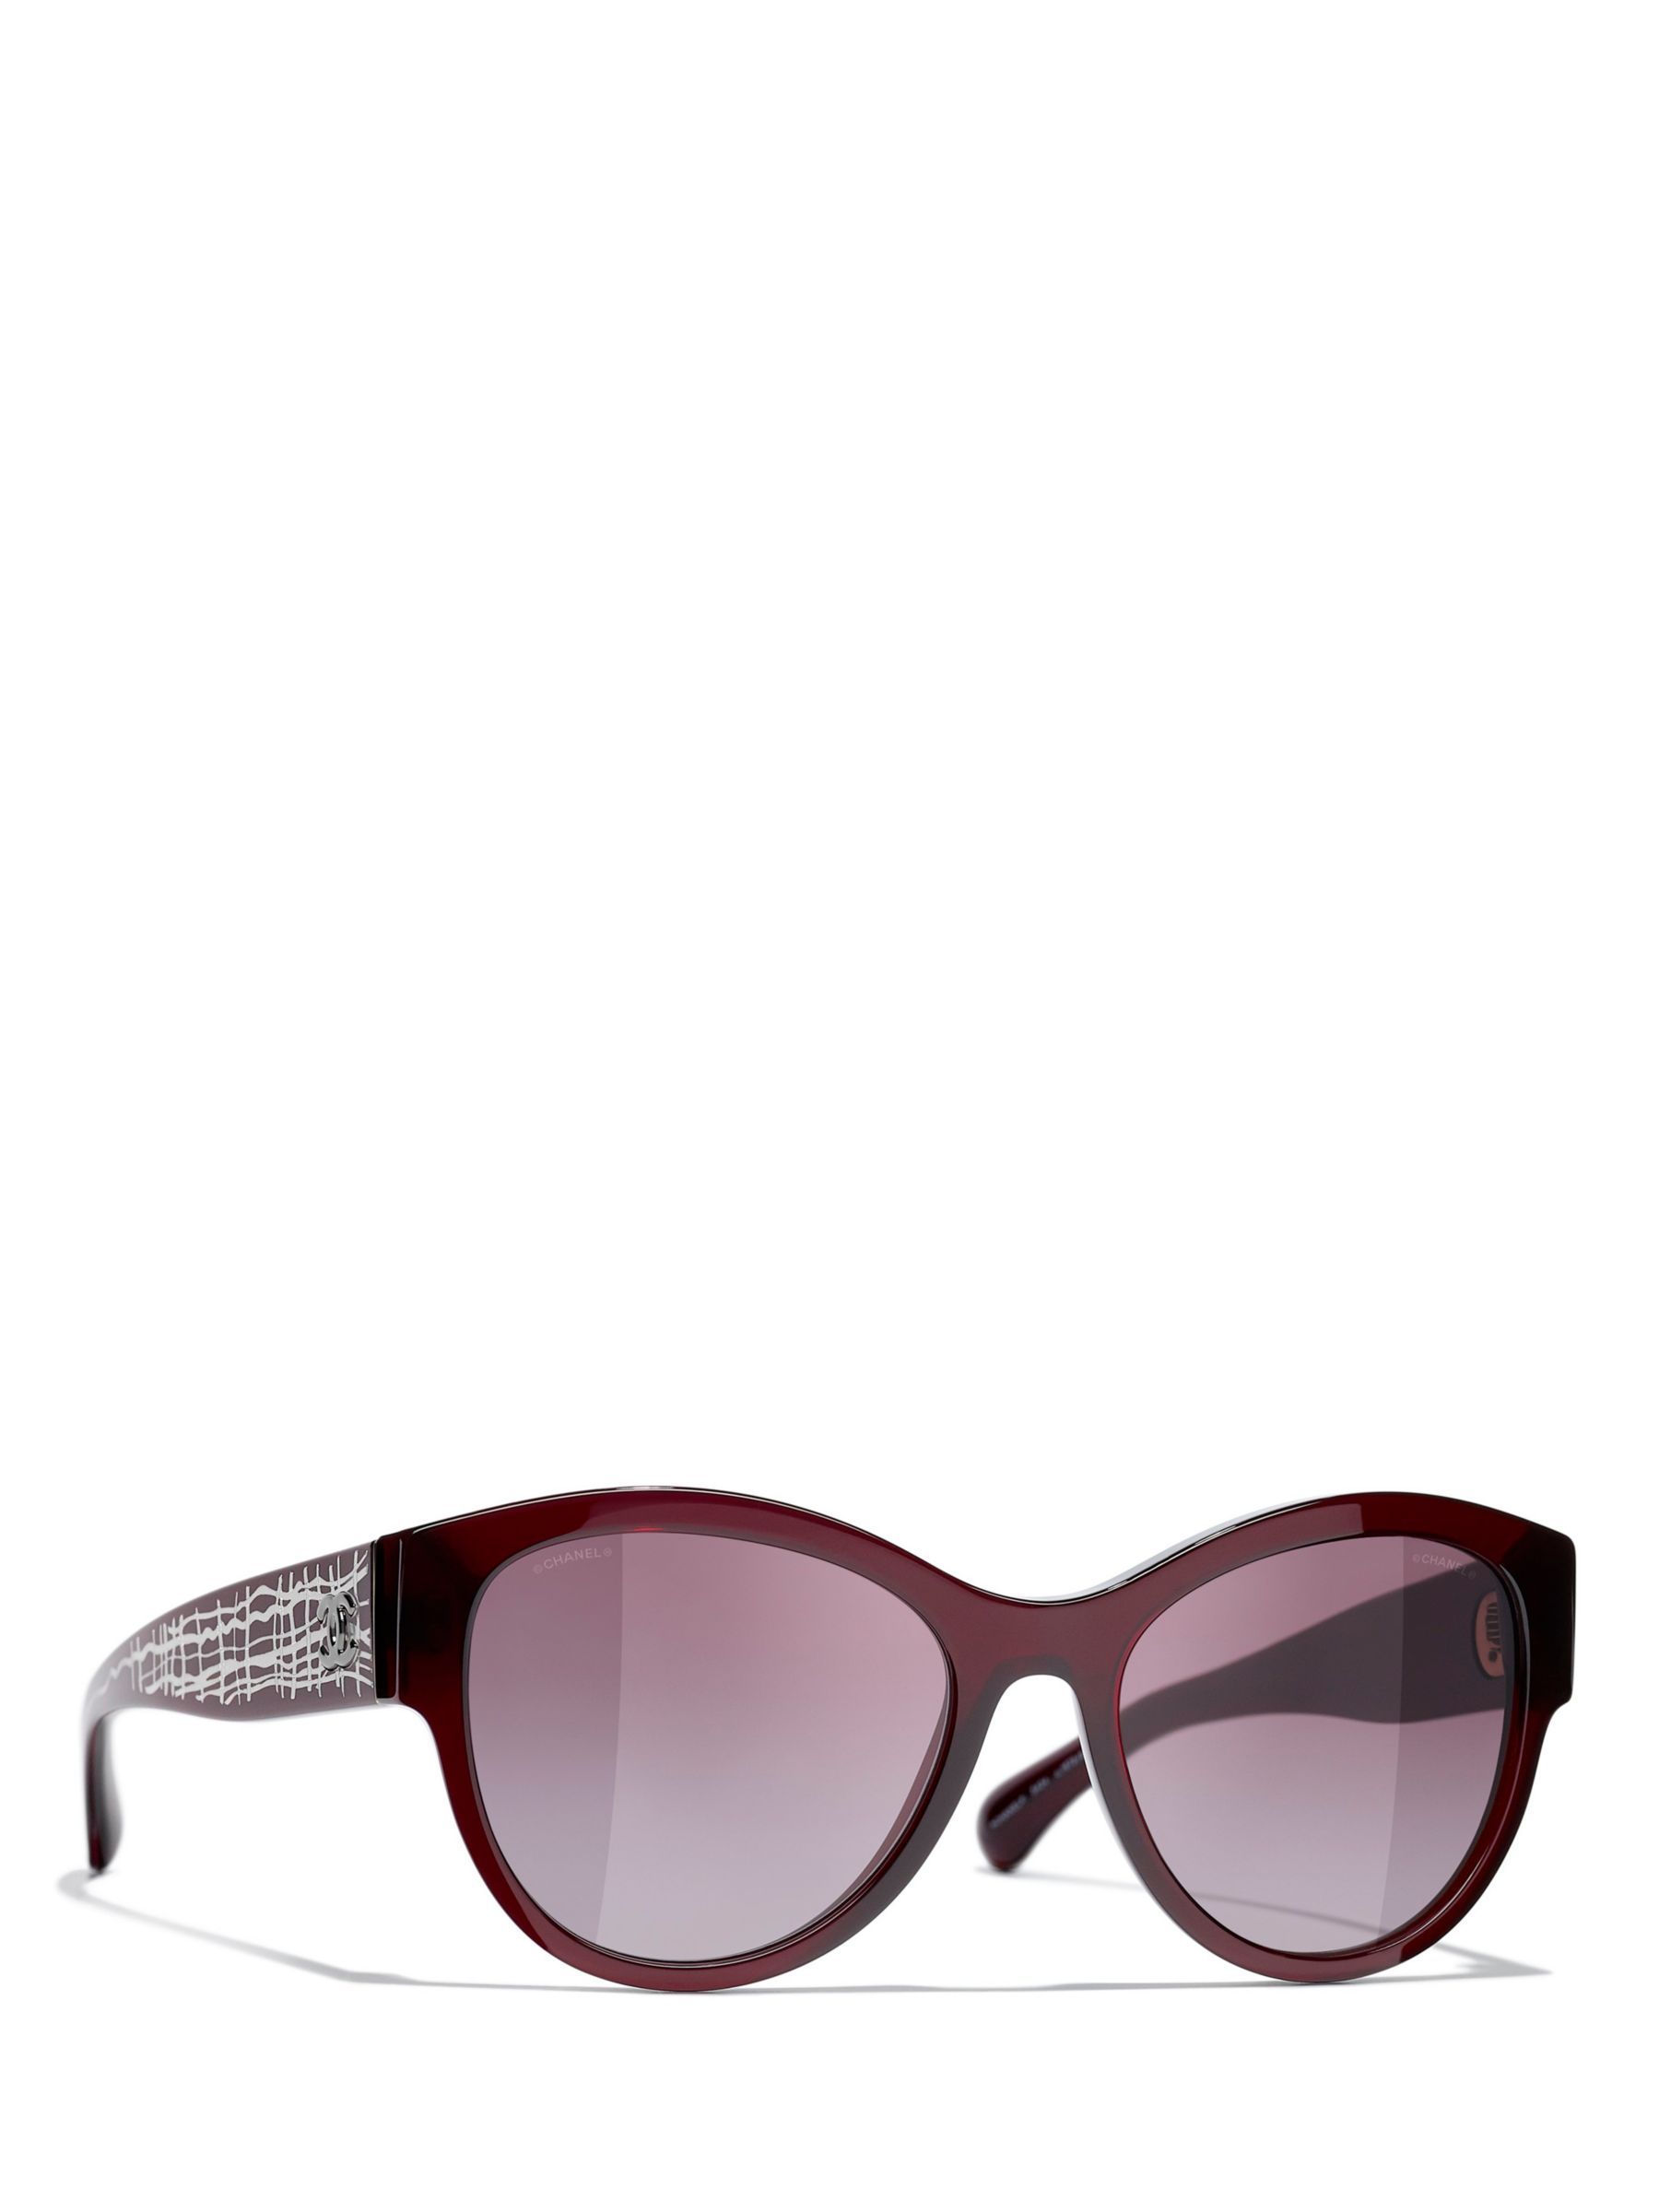 CHANEL Oval Sunglasses CH5434 Dark Red/Pink Gradient at John Lewis